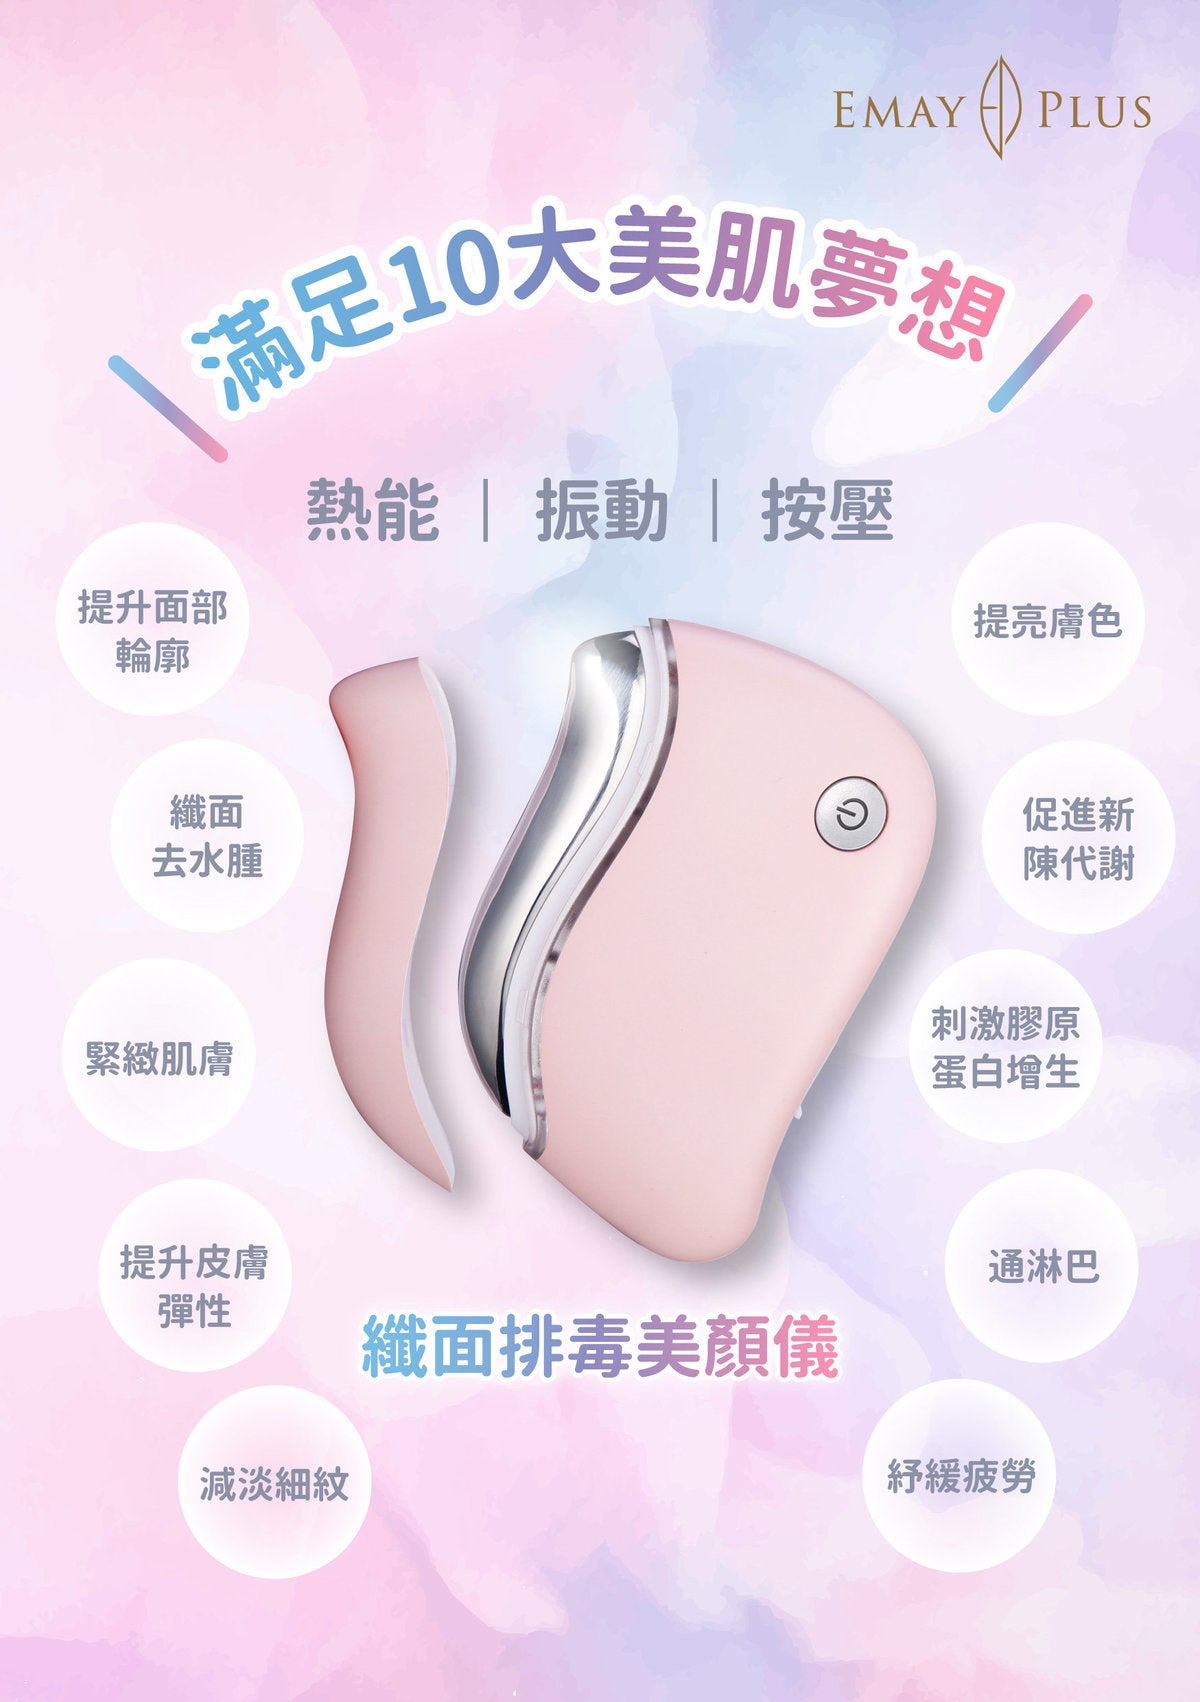 Emay Plus - EP-406 Slimming Detoxifying Beauty Device (Limited Edition) - Morning Glory